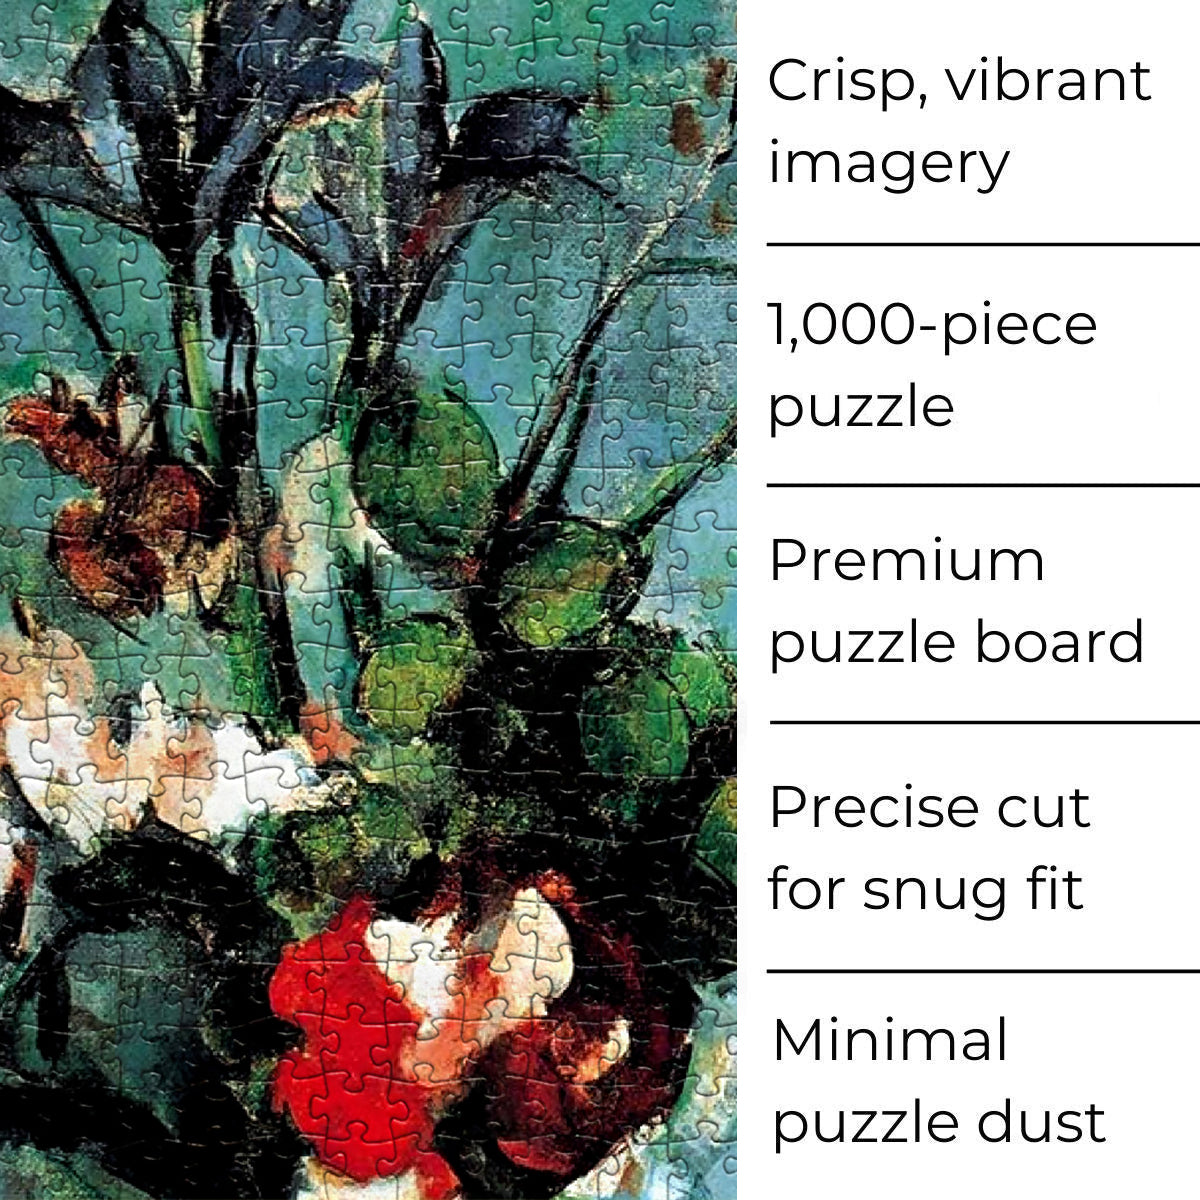 Eurographics' Blue Vase jigsaw puzzle: a 1000-piece wall art masterpiece inspired by Paul Cezanne's iconic work.